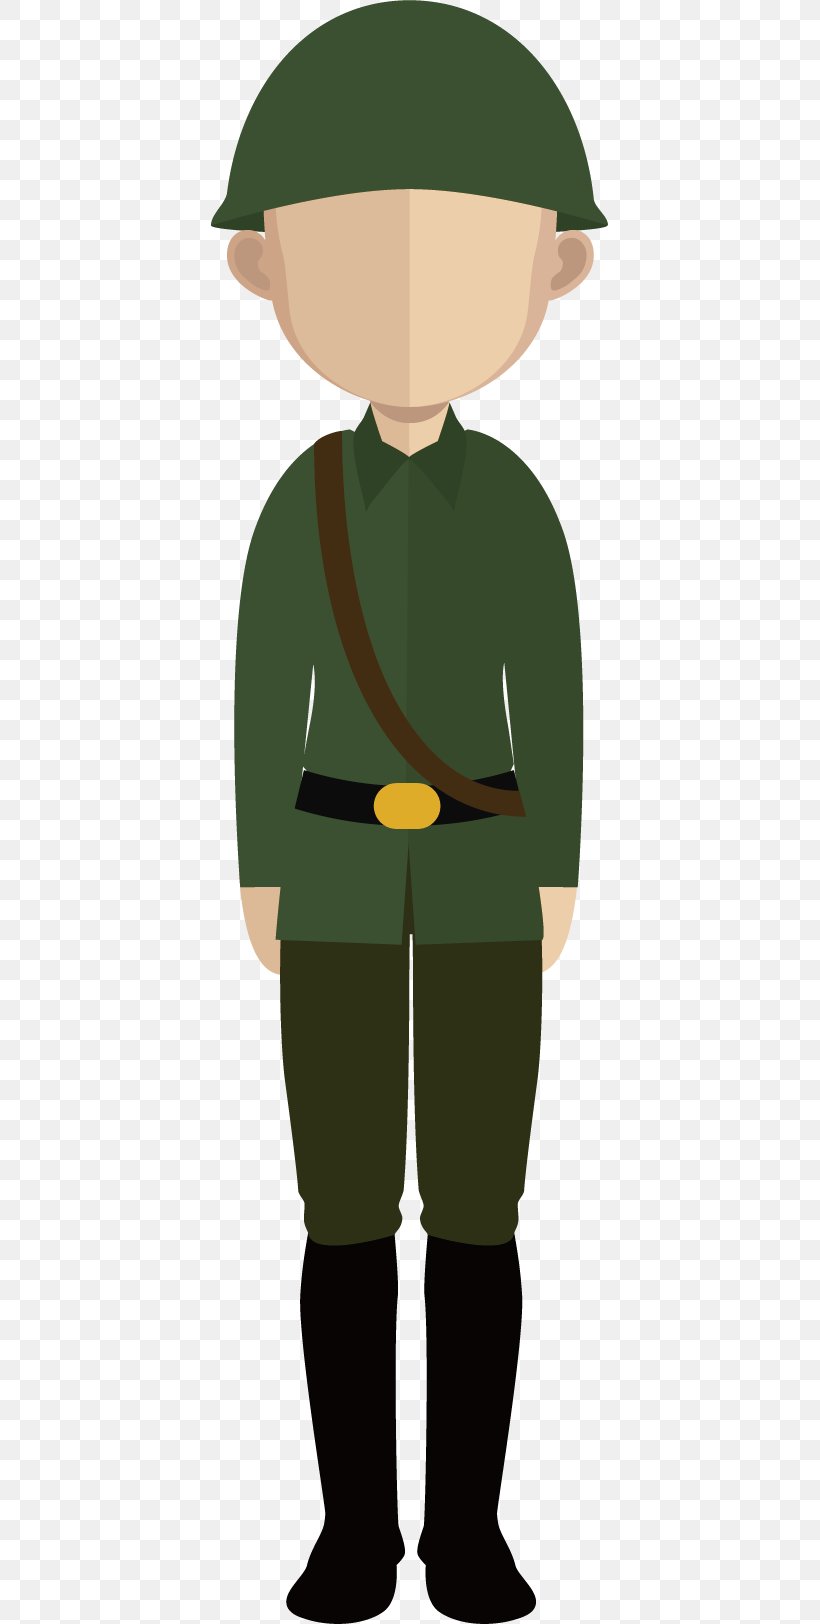 Drawing Army Animation Illustration, PNG, 397x1624px, Drawing, Animation, Army, Cartoon, Dessin Animxc3xa9 Download Free